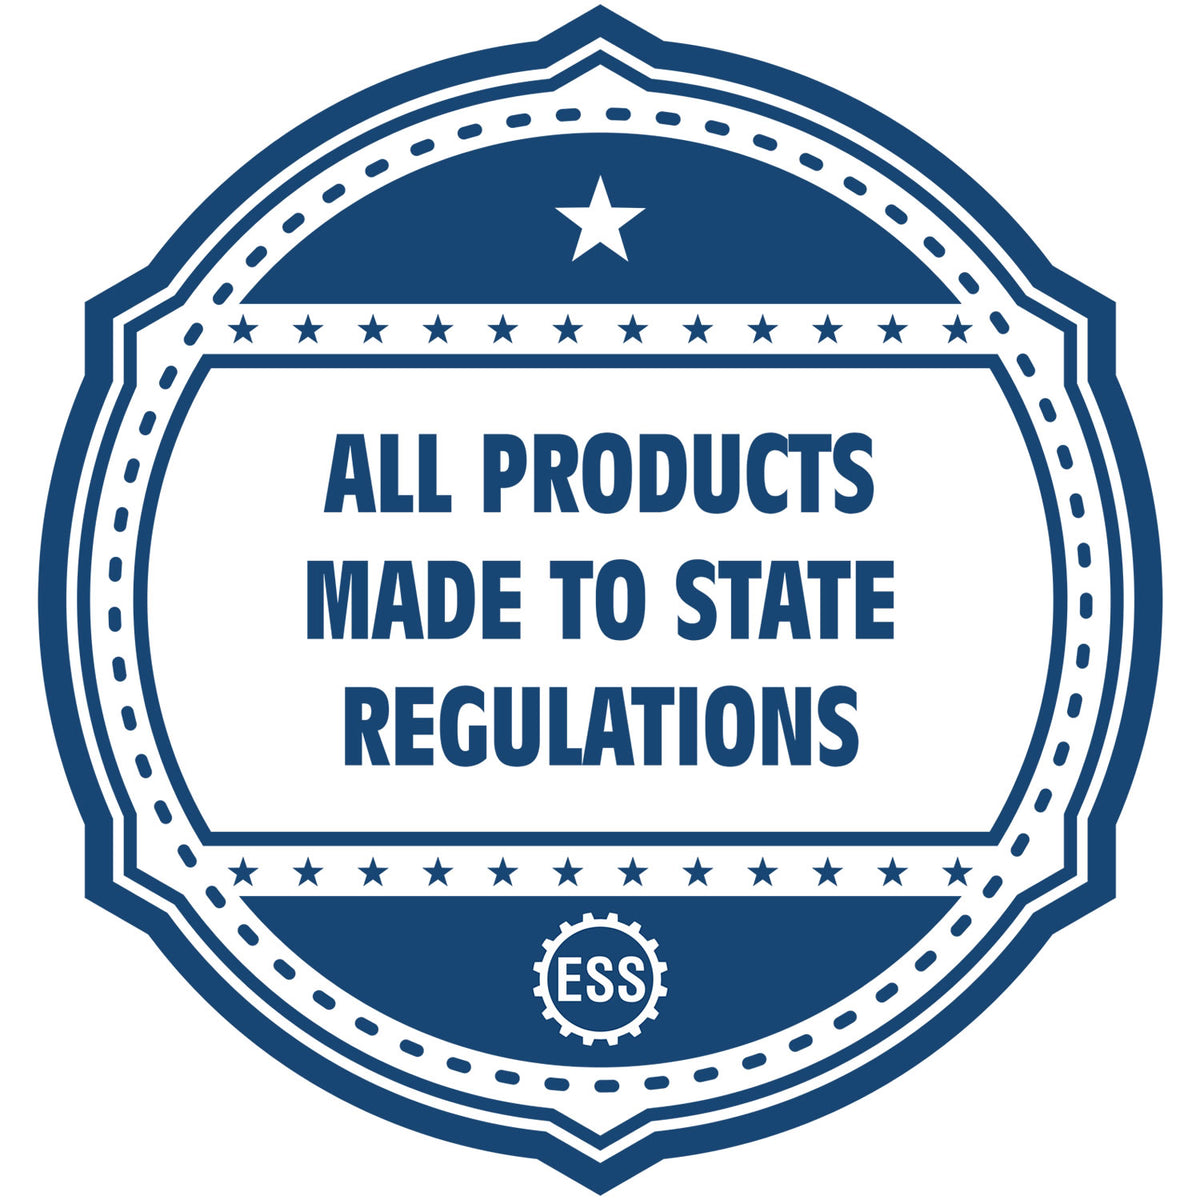 An icon or badge element for the Handheld Connecticut Professional Engineer Embosser showing that this product is made in compliance with state regulations.